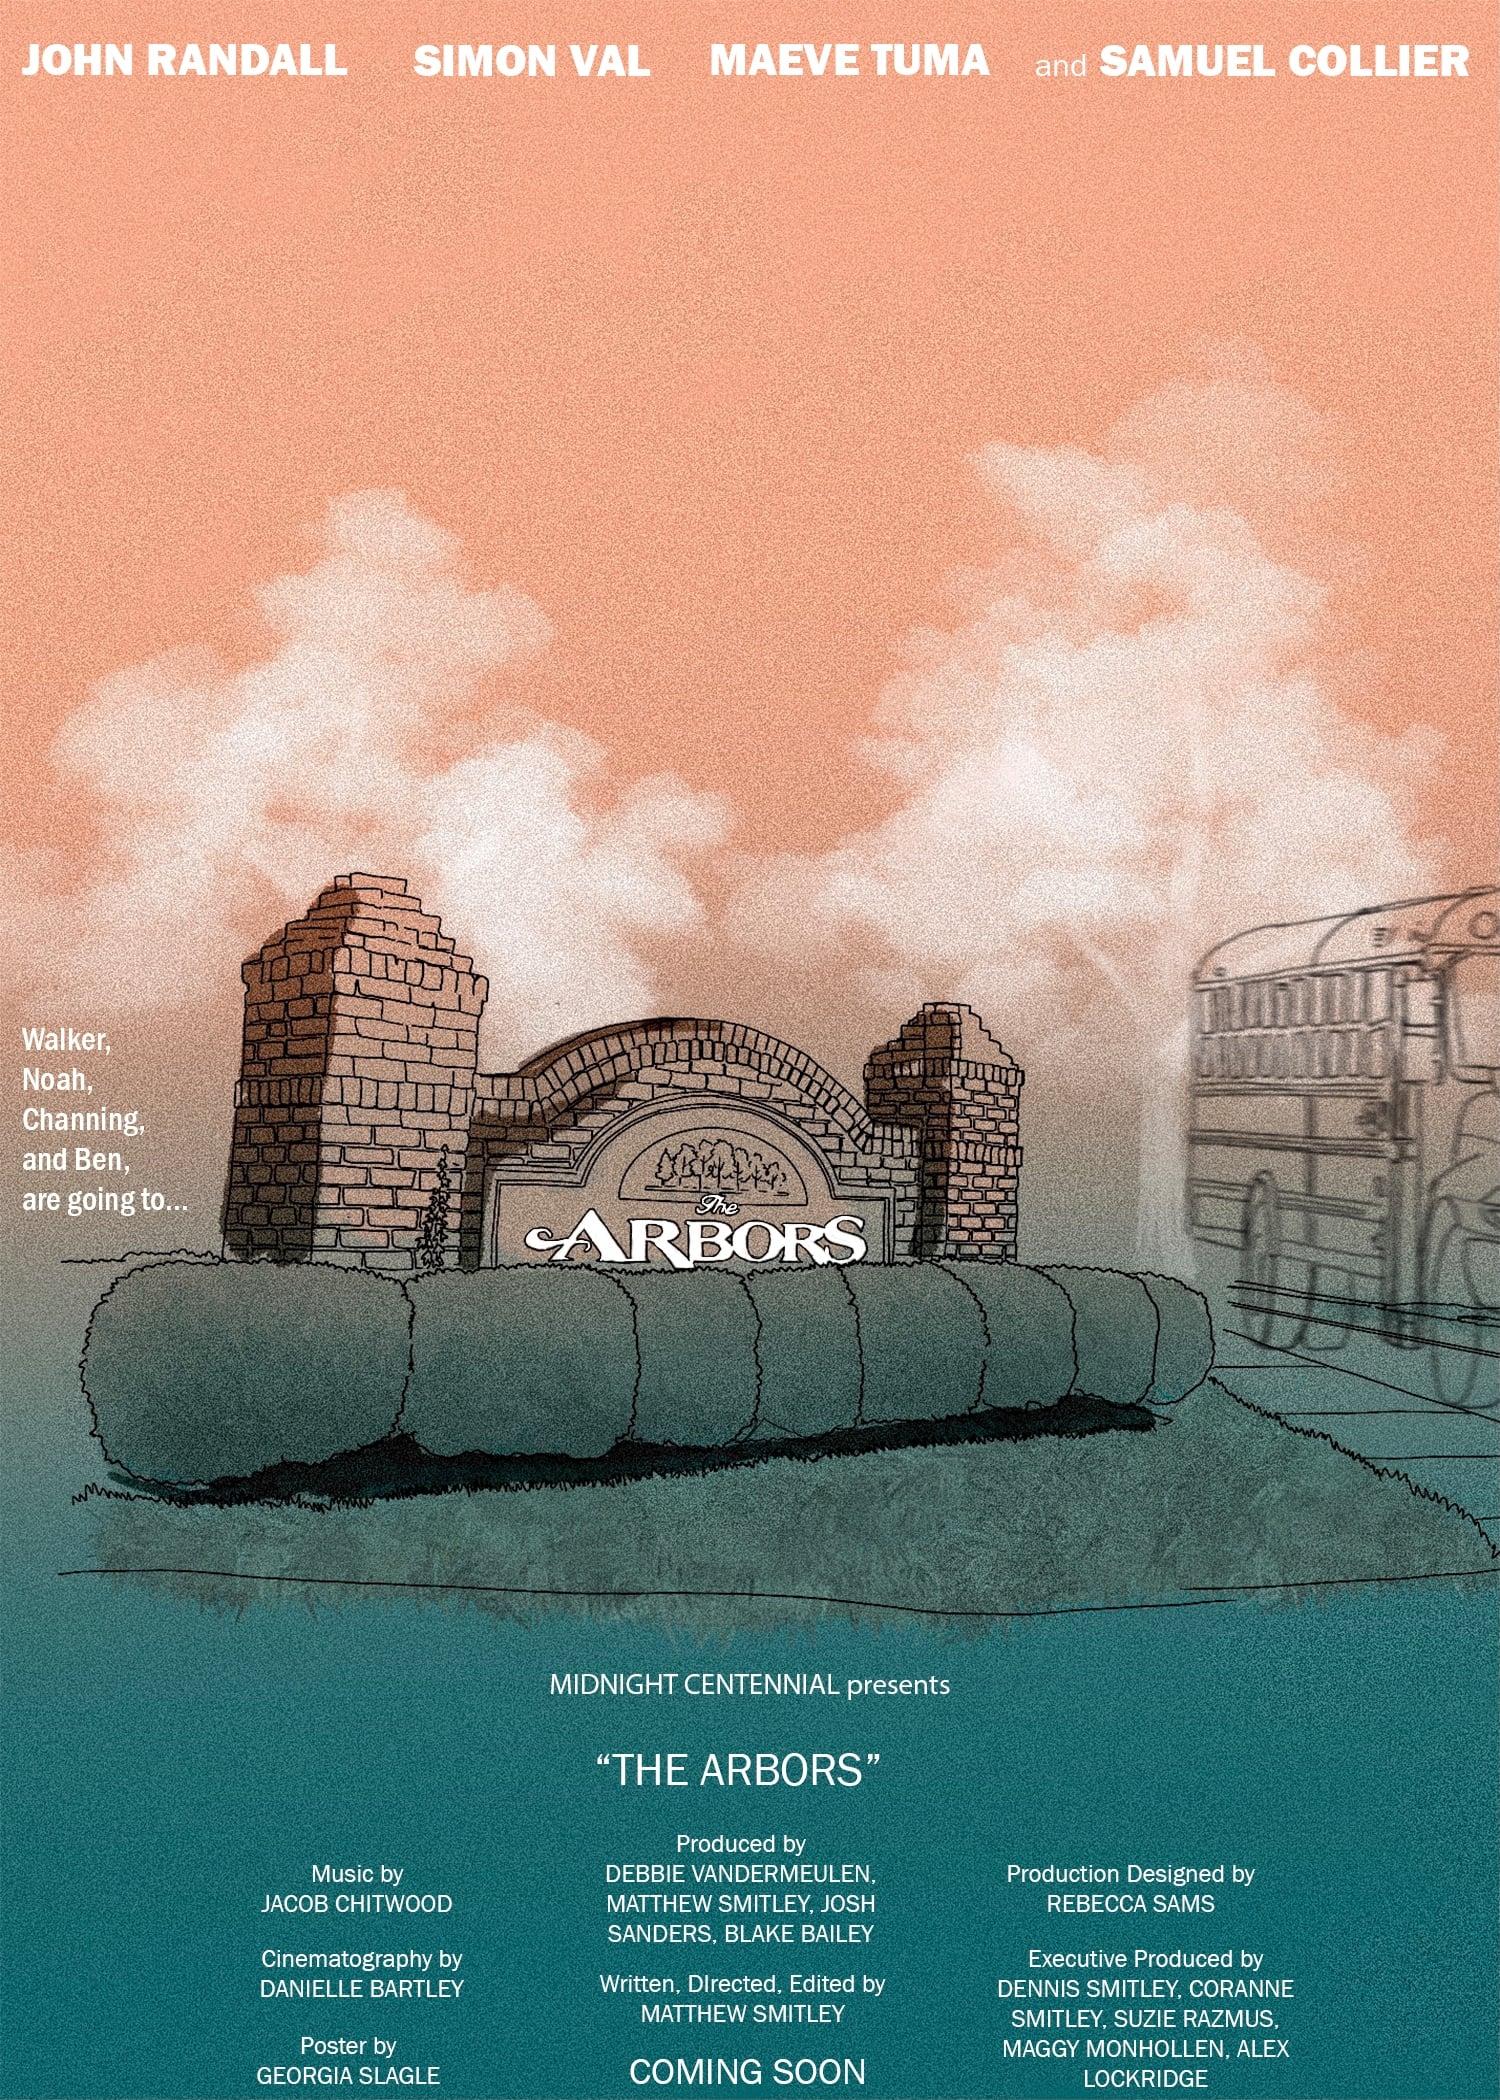 The Arbors poster